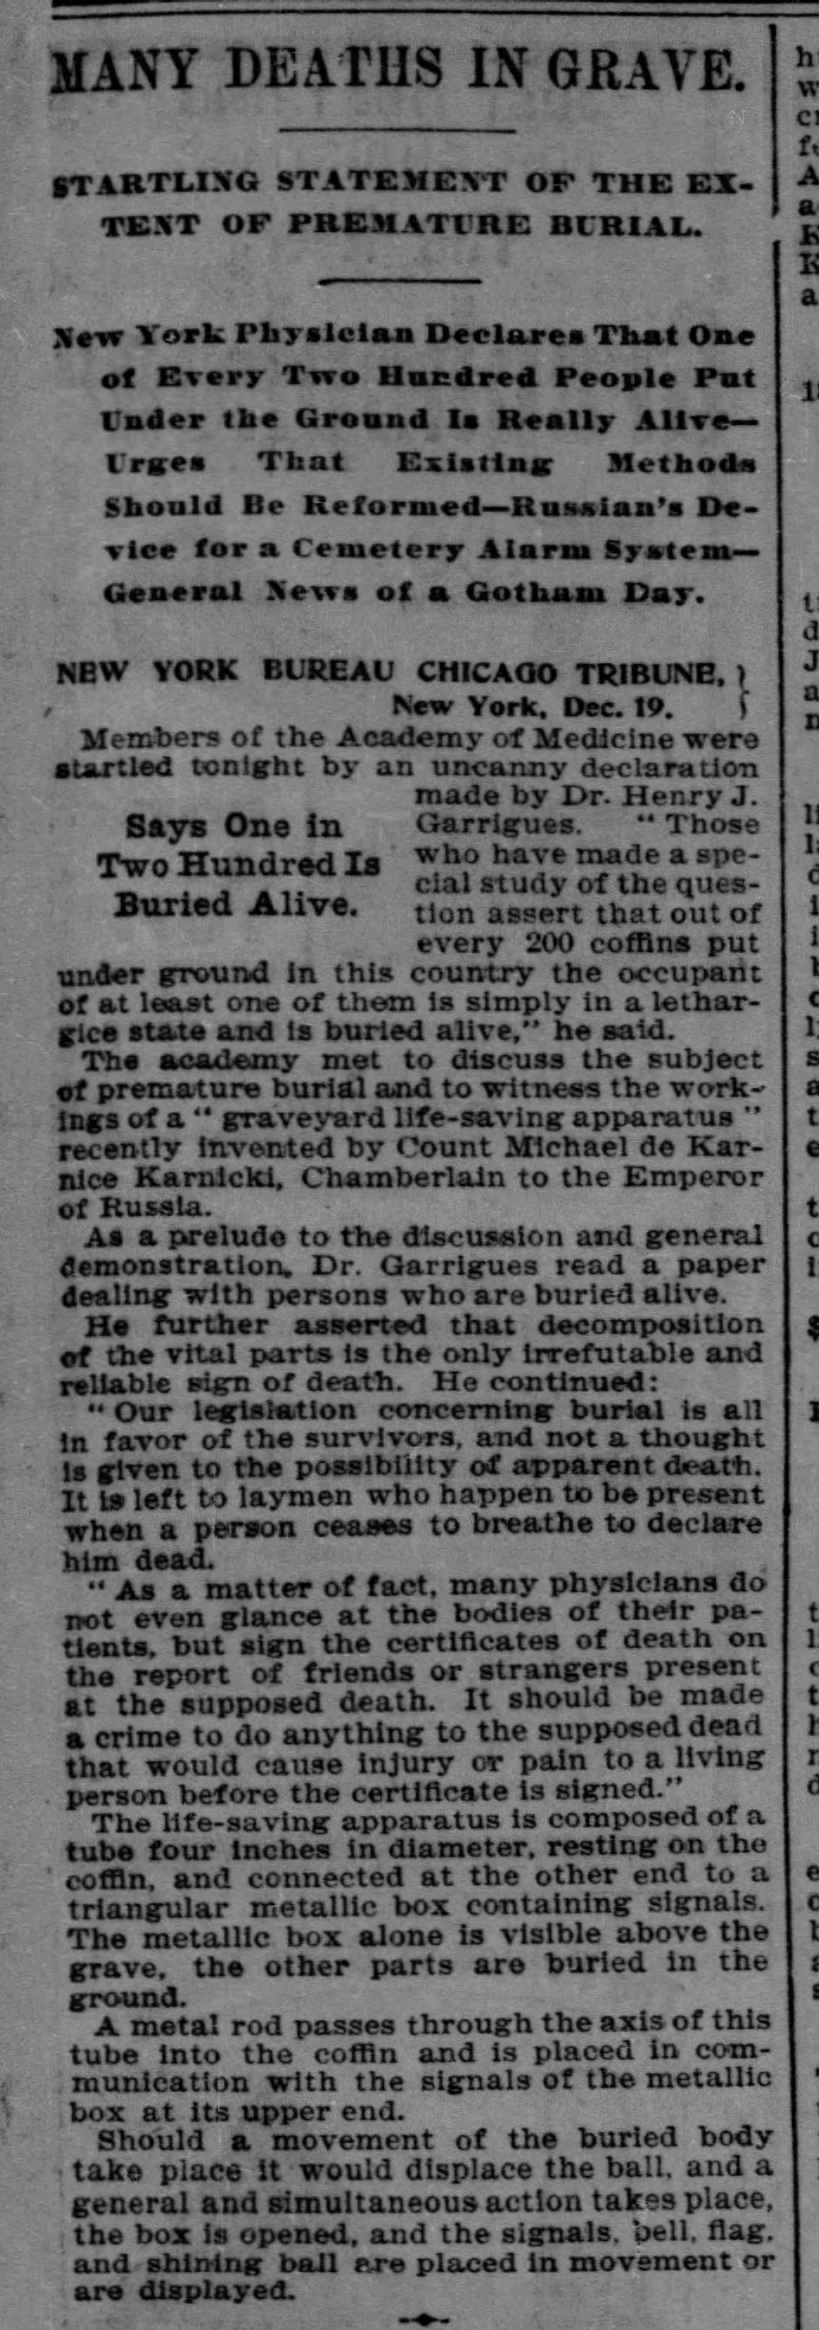 "Many Deaths in Grave" (1899)